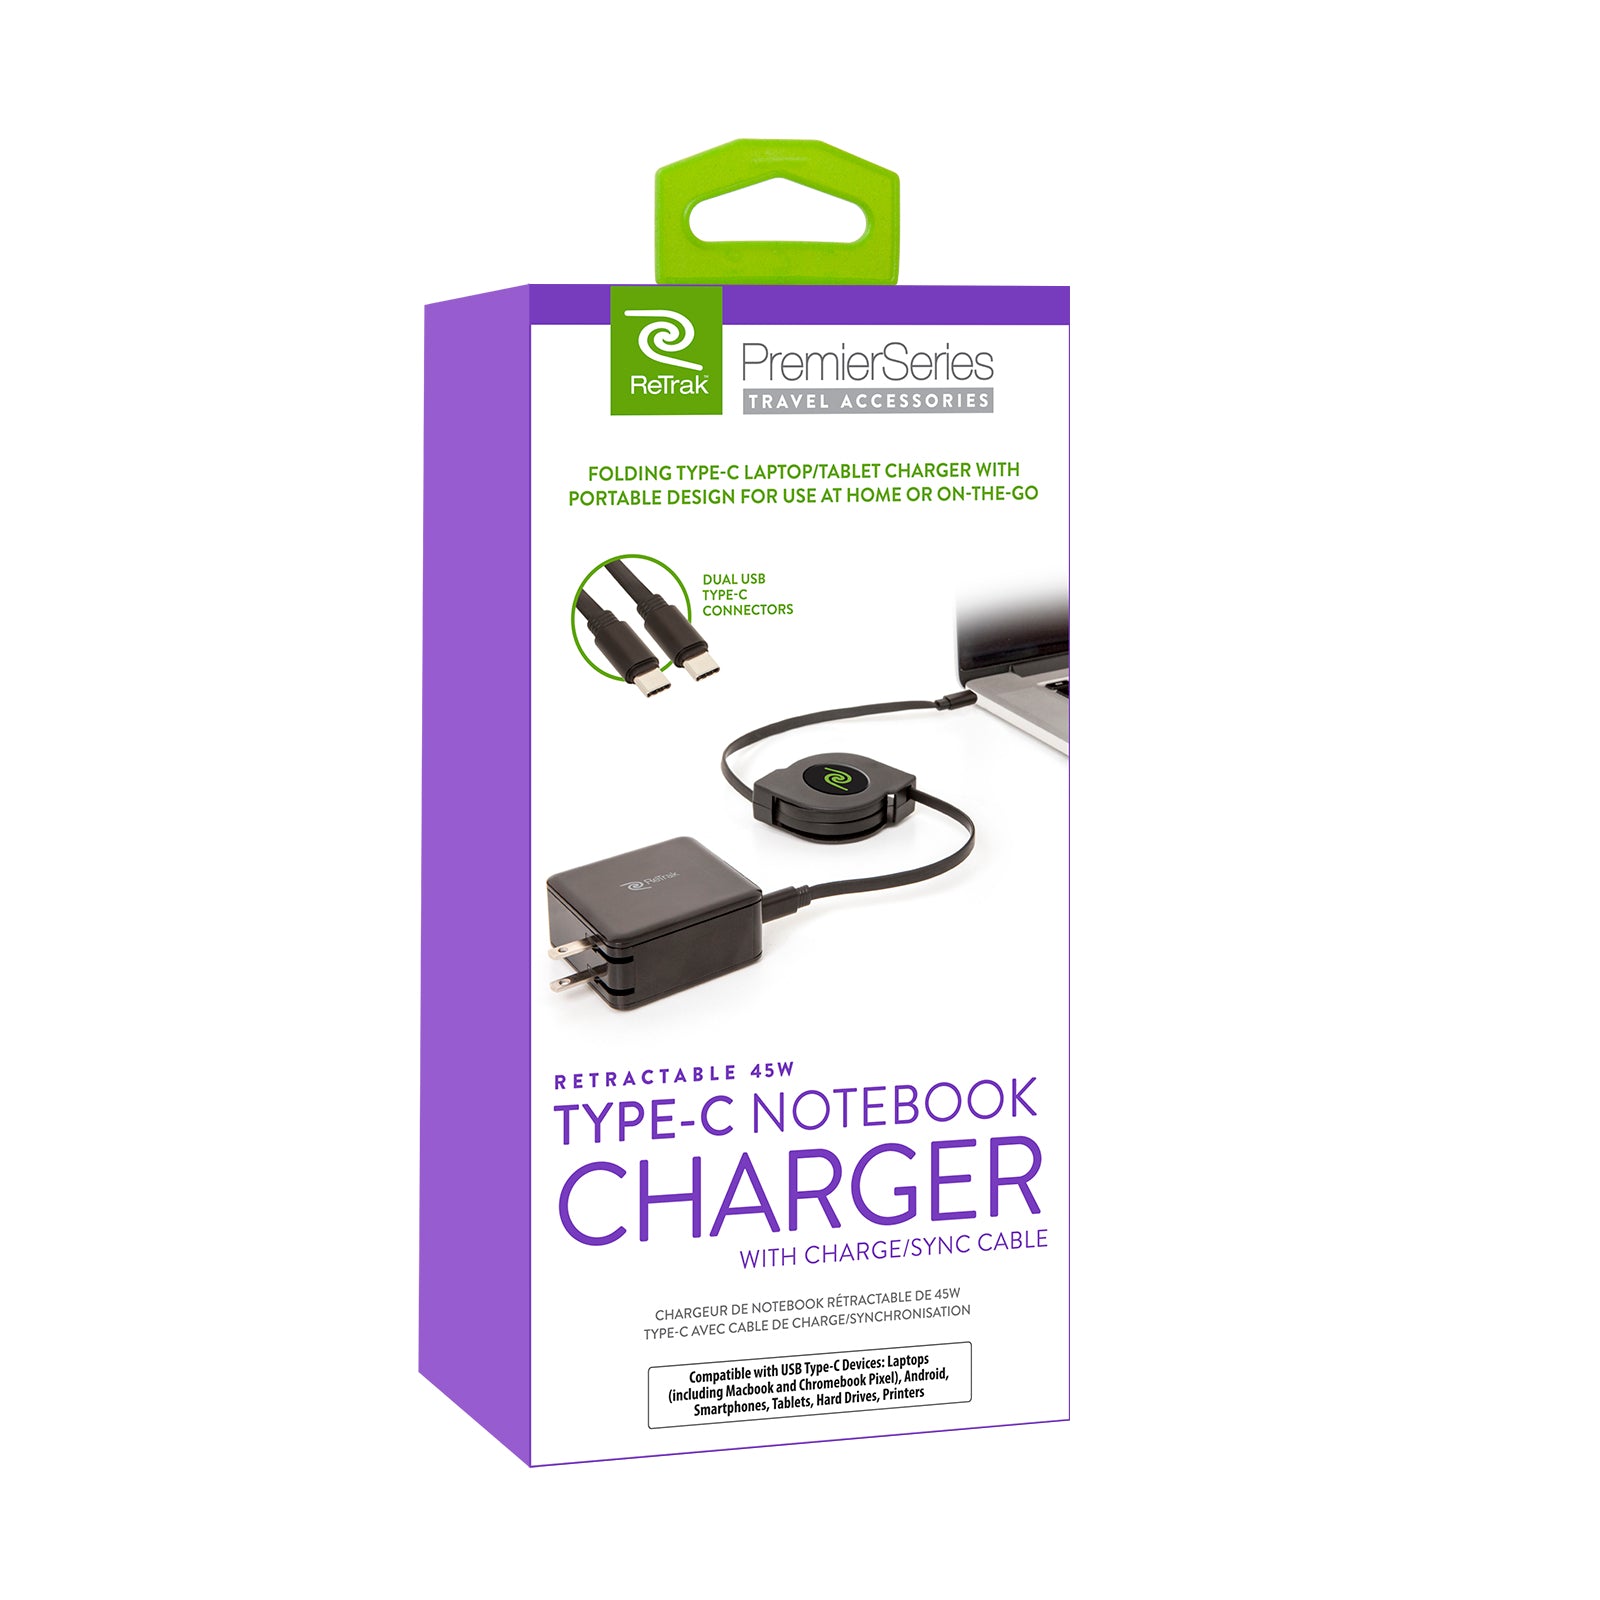 USB-C Notebook Charger | 45W Retractable Charger Cable